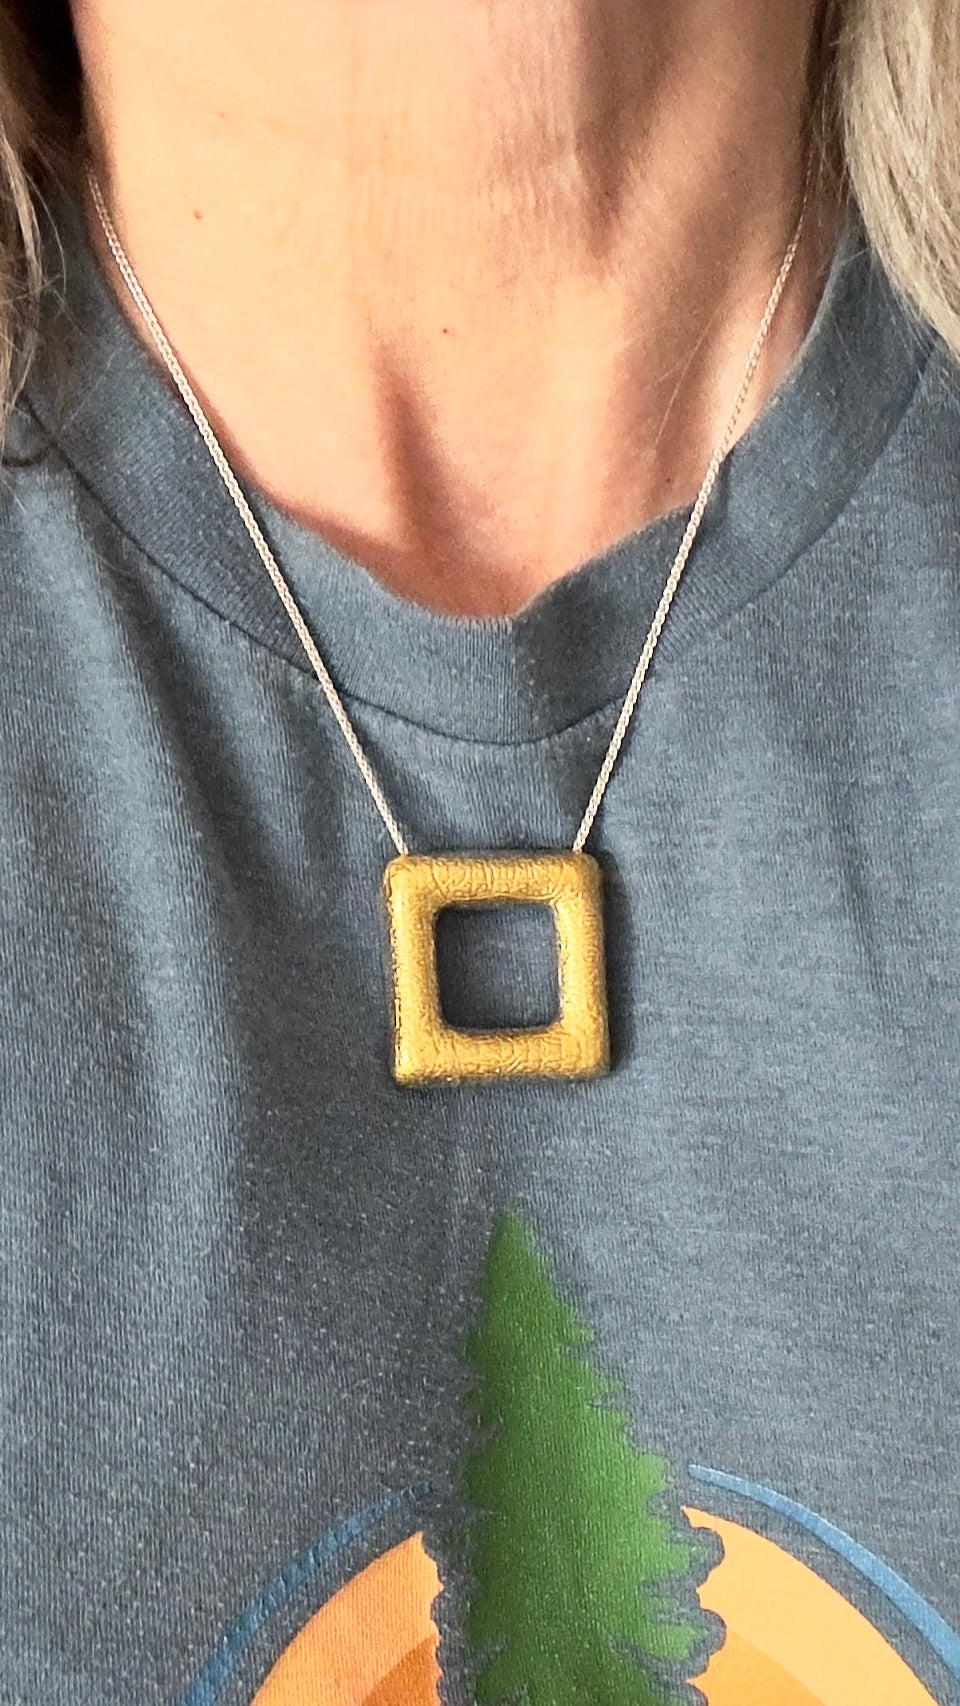 Square Hollow form Pendant with Gold